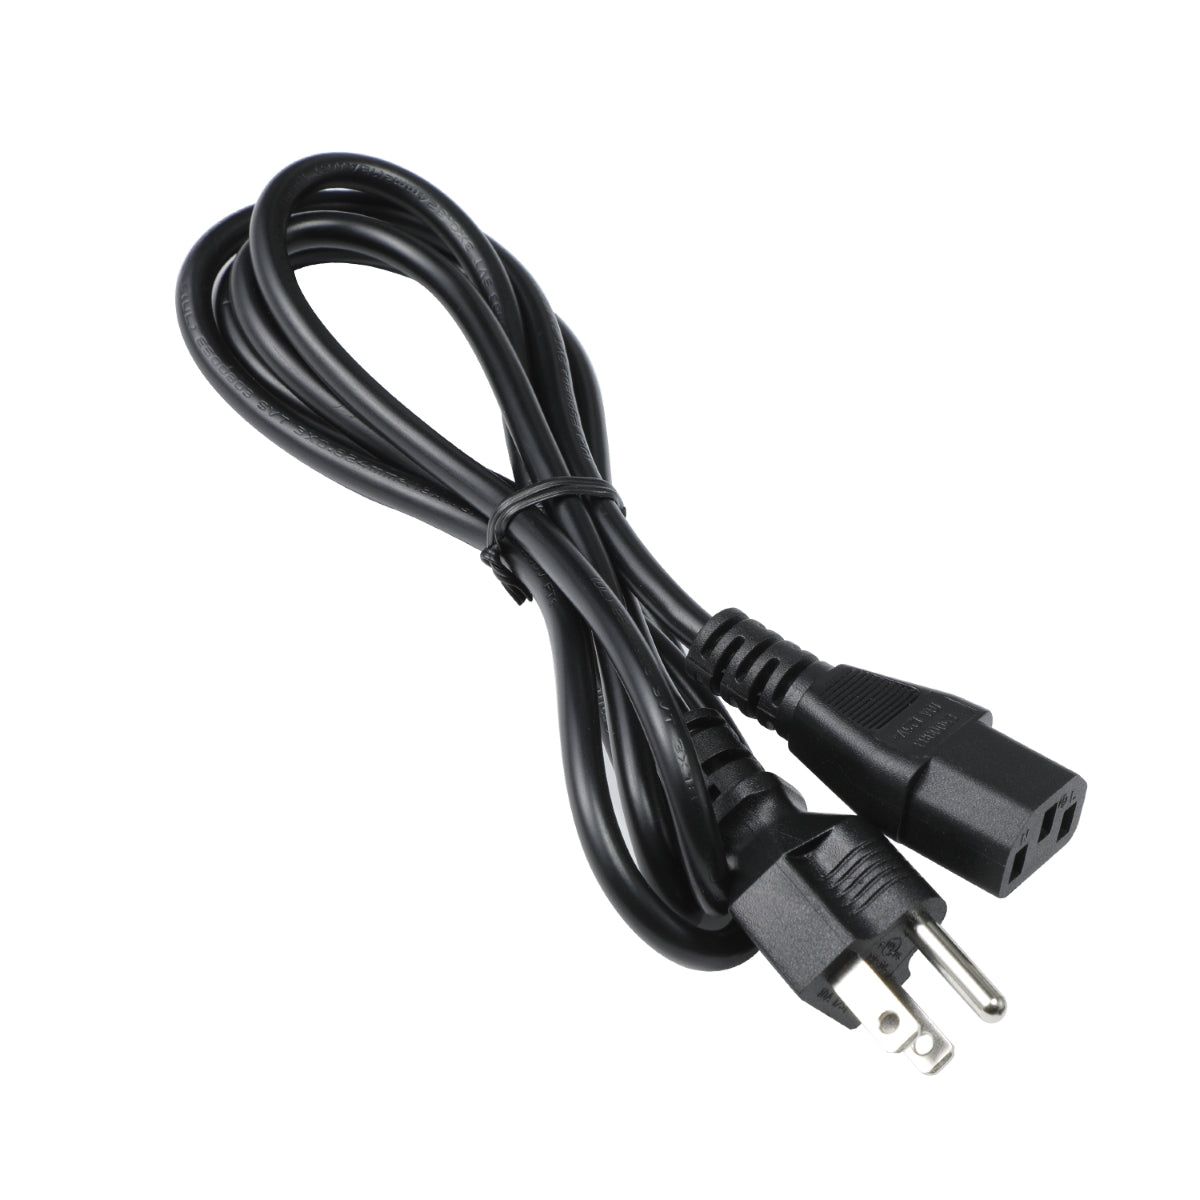 Power Cord for Dell SE2717HR Monitor.